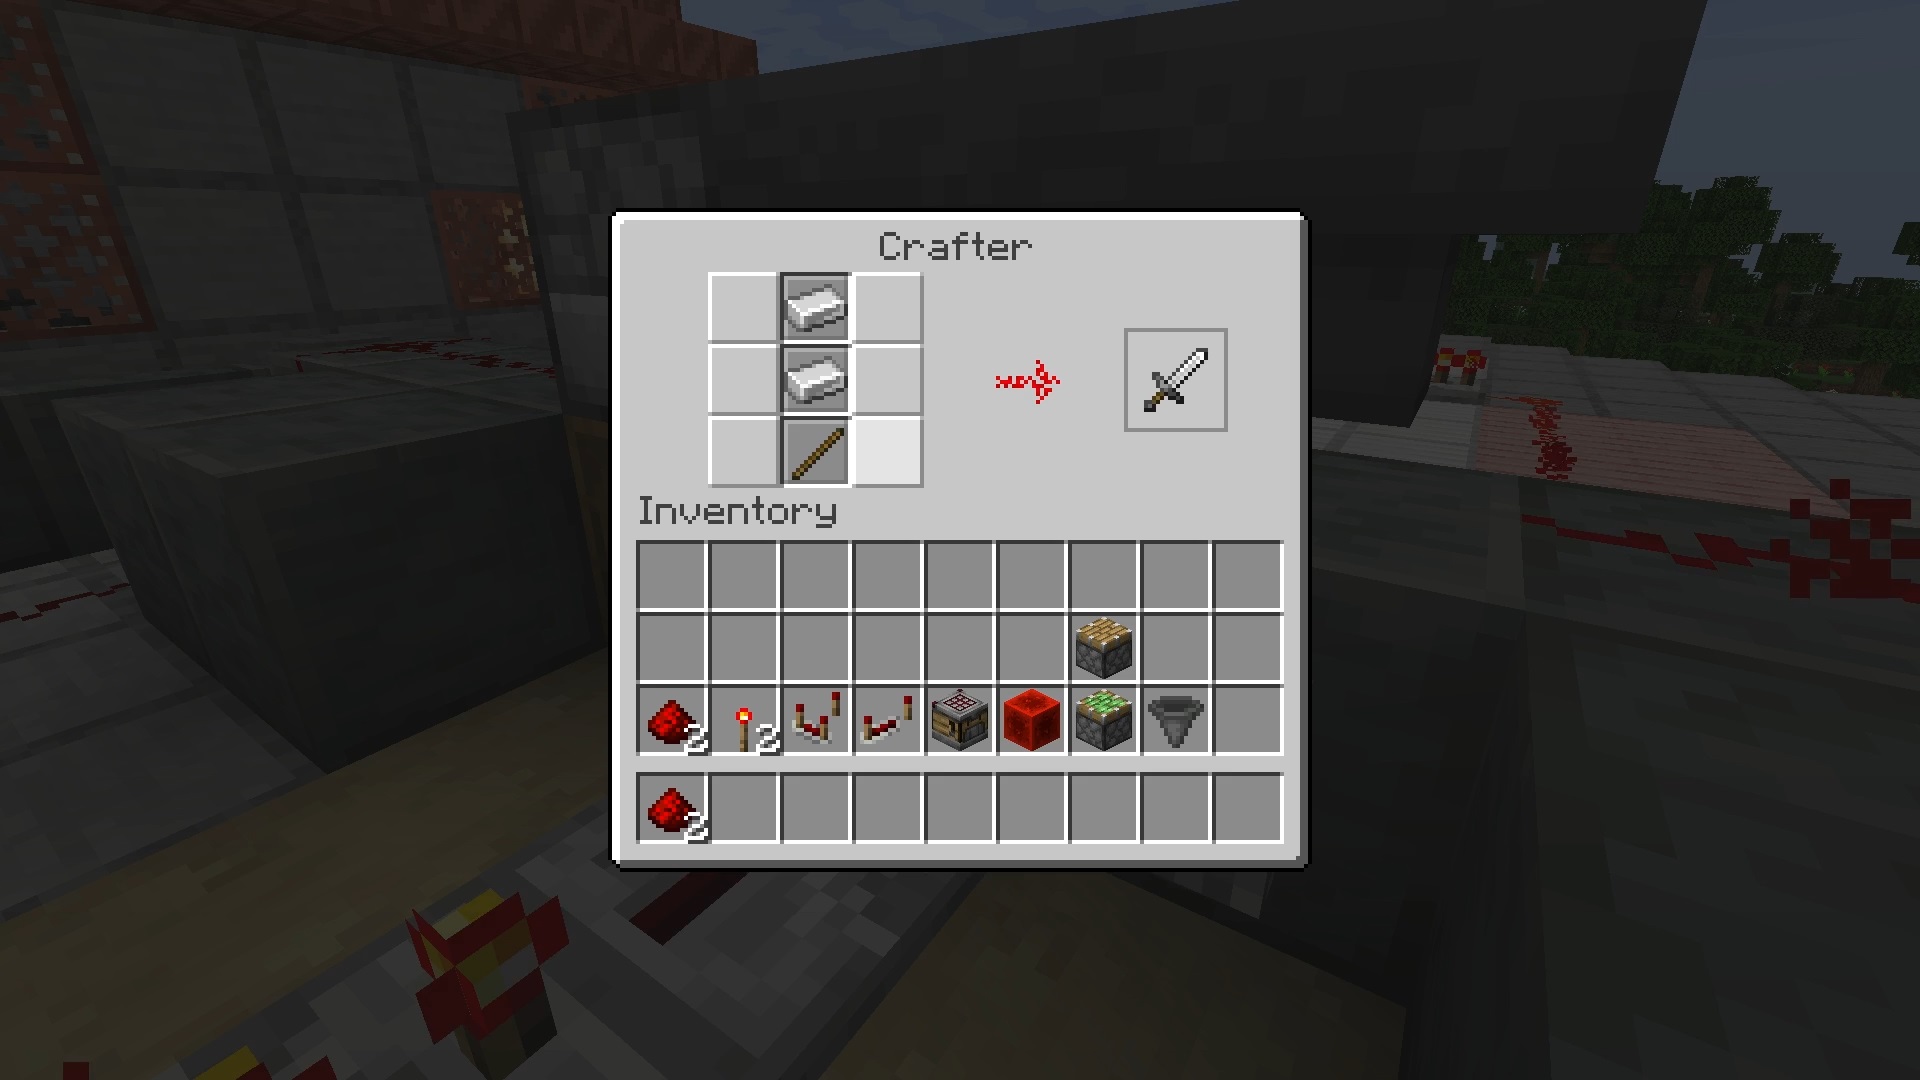 Minecraft 1.21 update - a Crafter block interface showing its inventory and an iron sword recipe